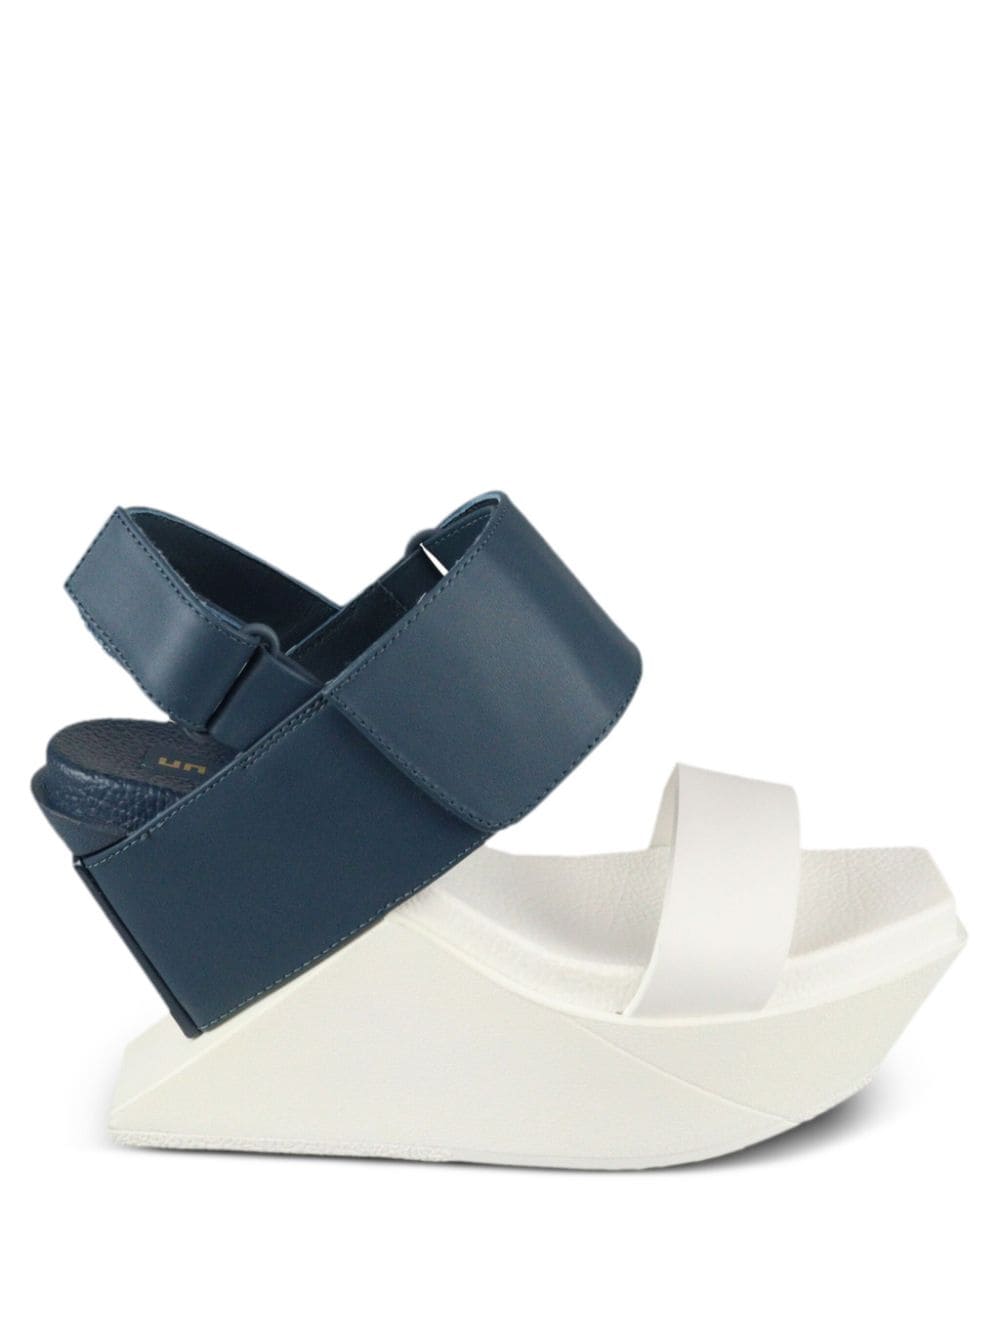 United Nude Delta Wedge Leather Sandals In 蓝色